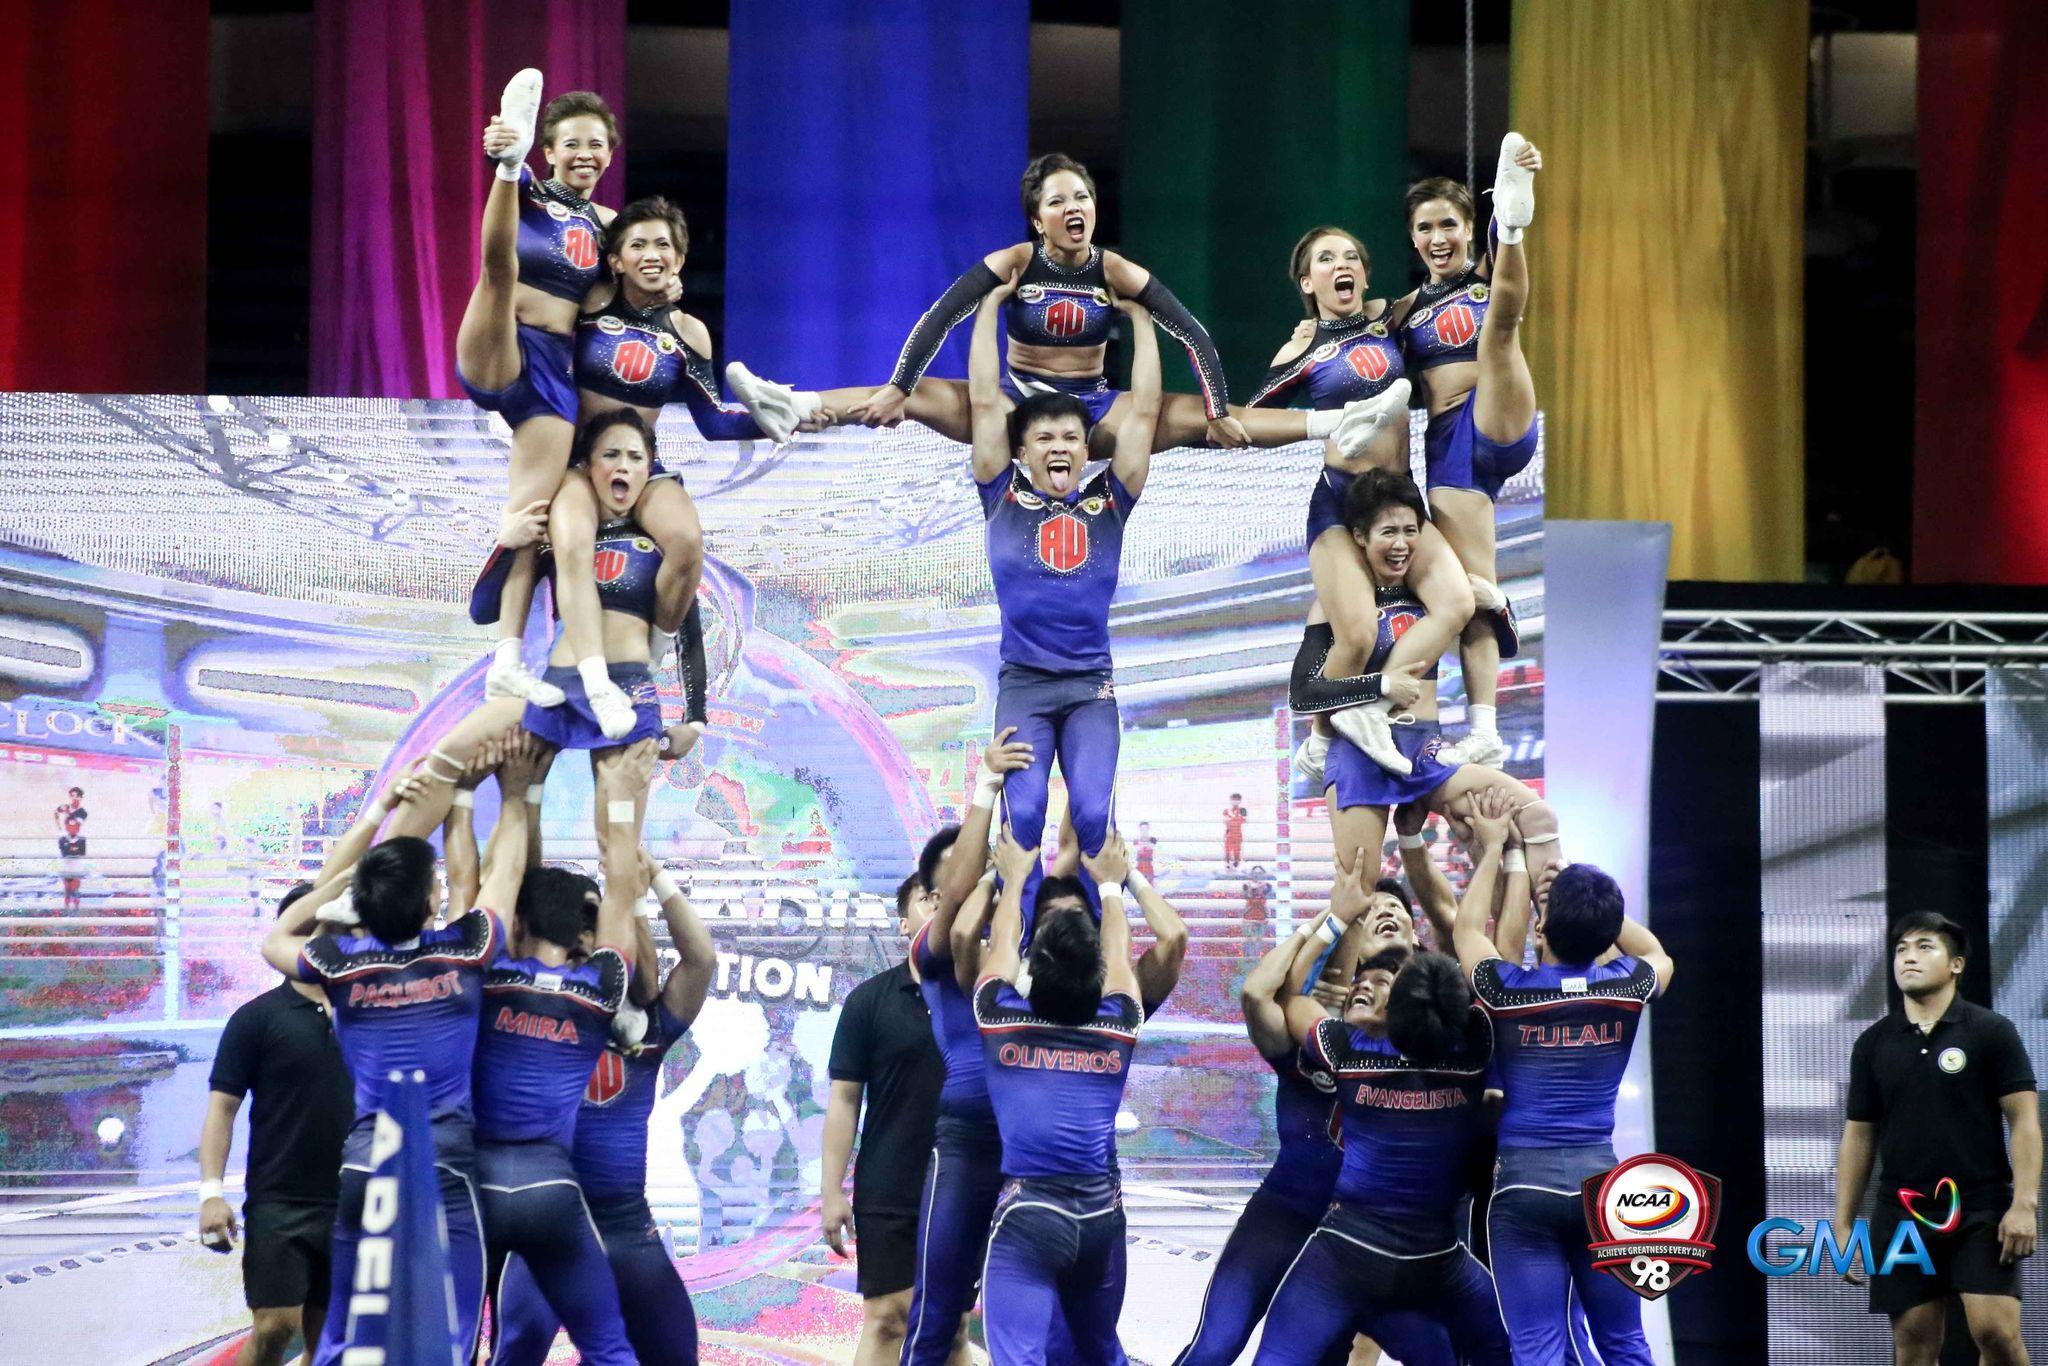 Arellano completes fourpeat in NCAA Cheerleading Competition